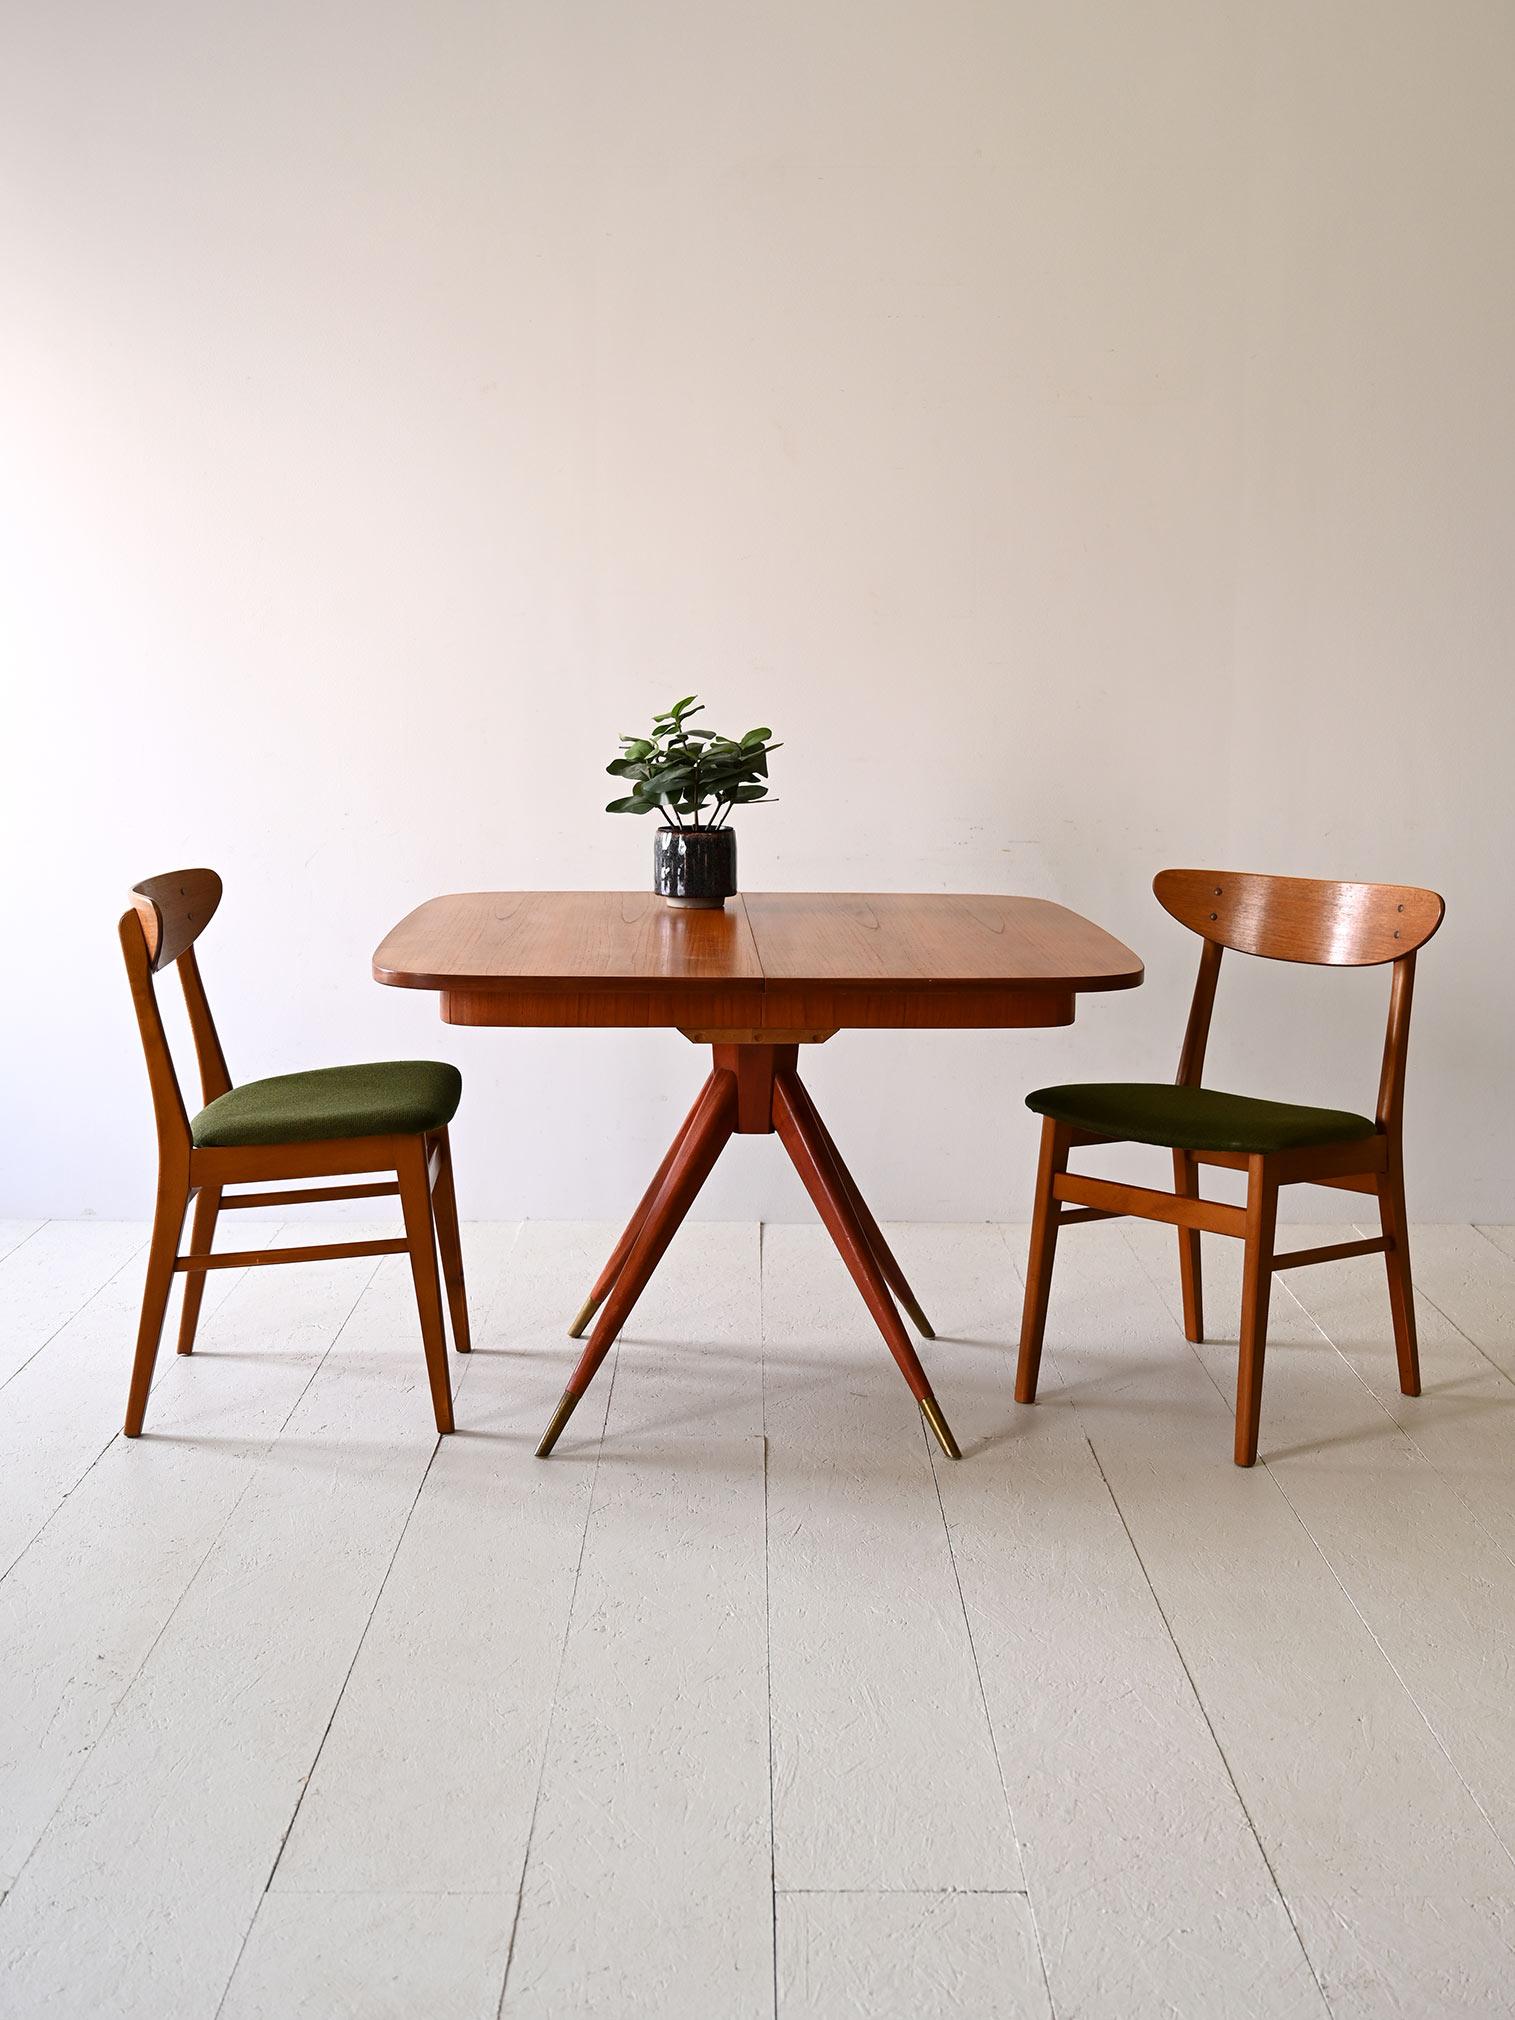 Danish round dining table from the 1950s.

Its long, slender, tapered legs add a distinctive touch to the décor, while the markedly grain teak top adds a touch of elegance. It combines aesthetics and functionality, offering the option of extending